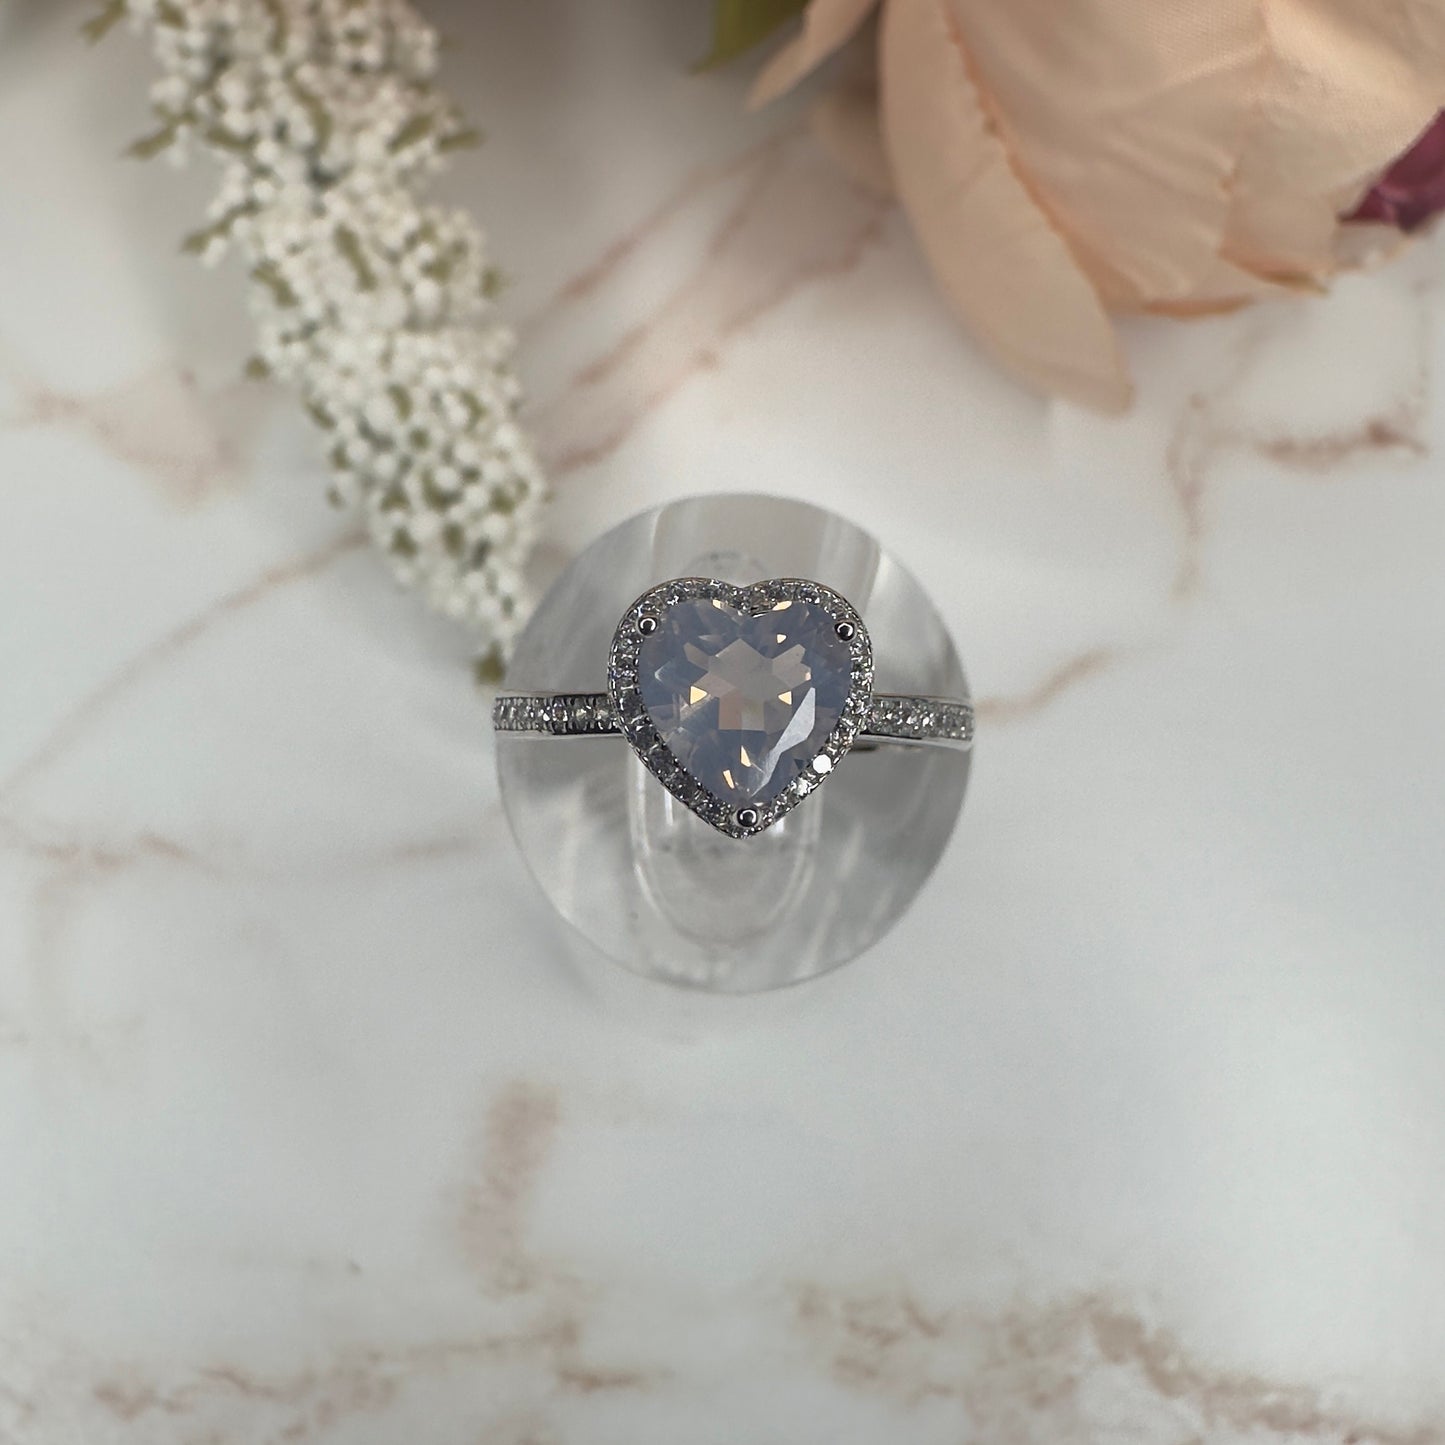 Gorgeous Lavender Moon Quartz Ring In Adjustable 925 Sterling Silver Heart Shaped High-Quality Crystal Jewelry With Transparent Zircon